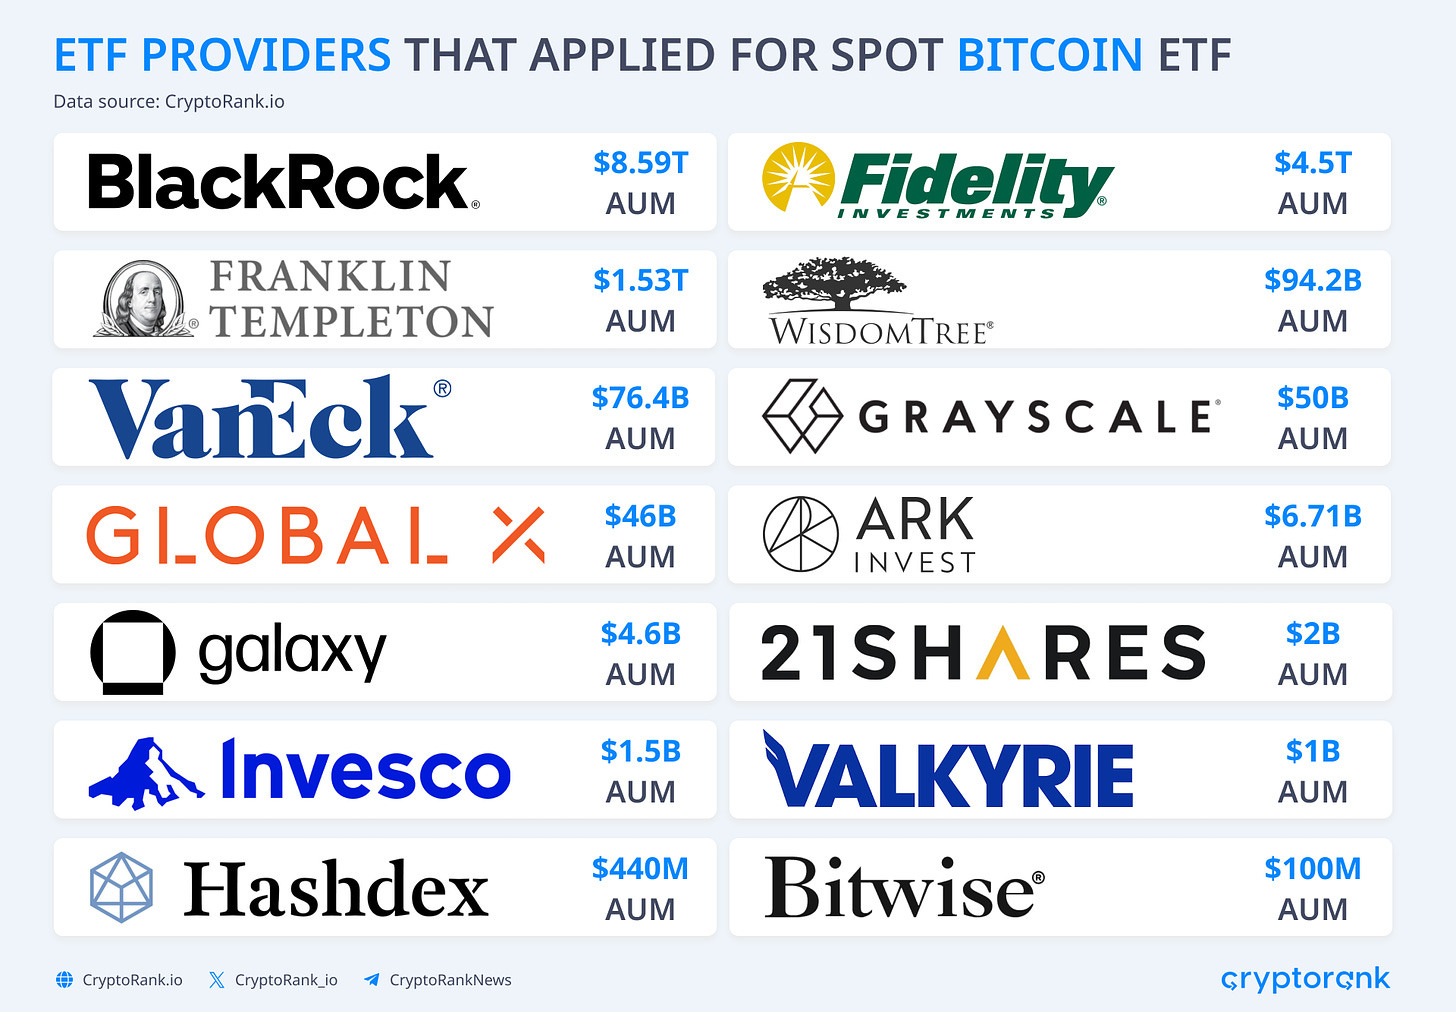 The Anticipated Approval of a Spot Bitcoin ETF: A Catalyst for Bull Run